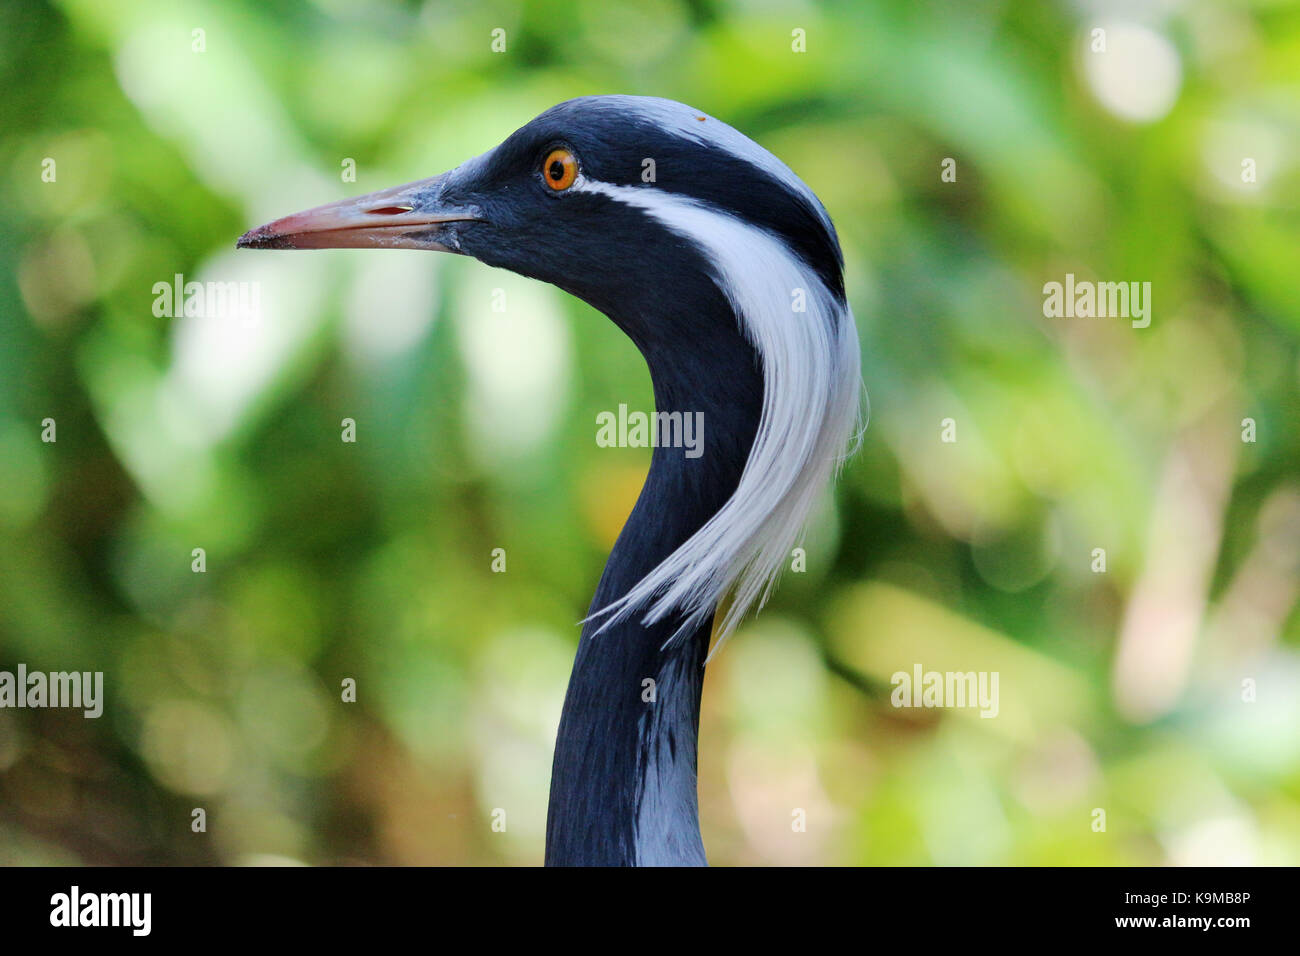 Demoiselle crane in its natural habitat with green leafy background. Stock Photo